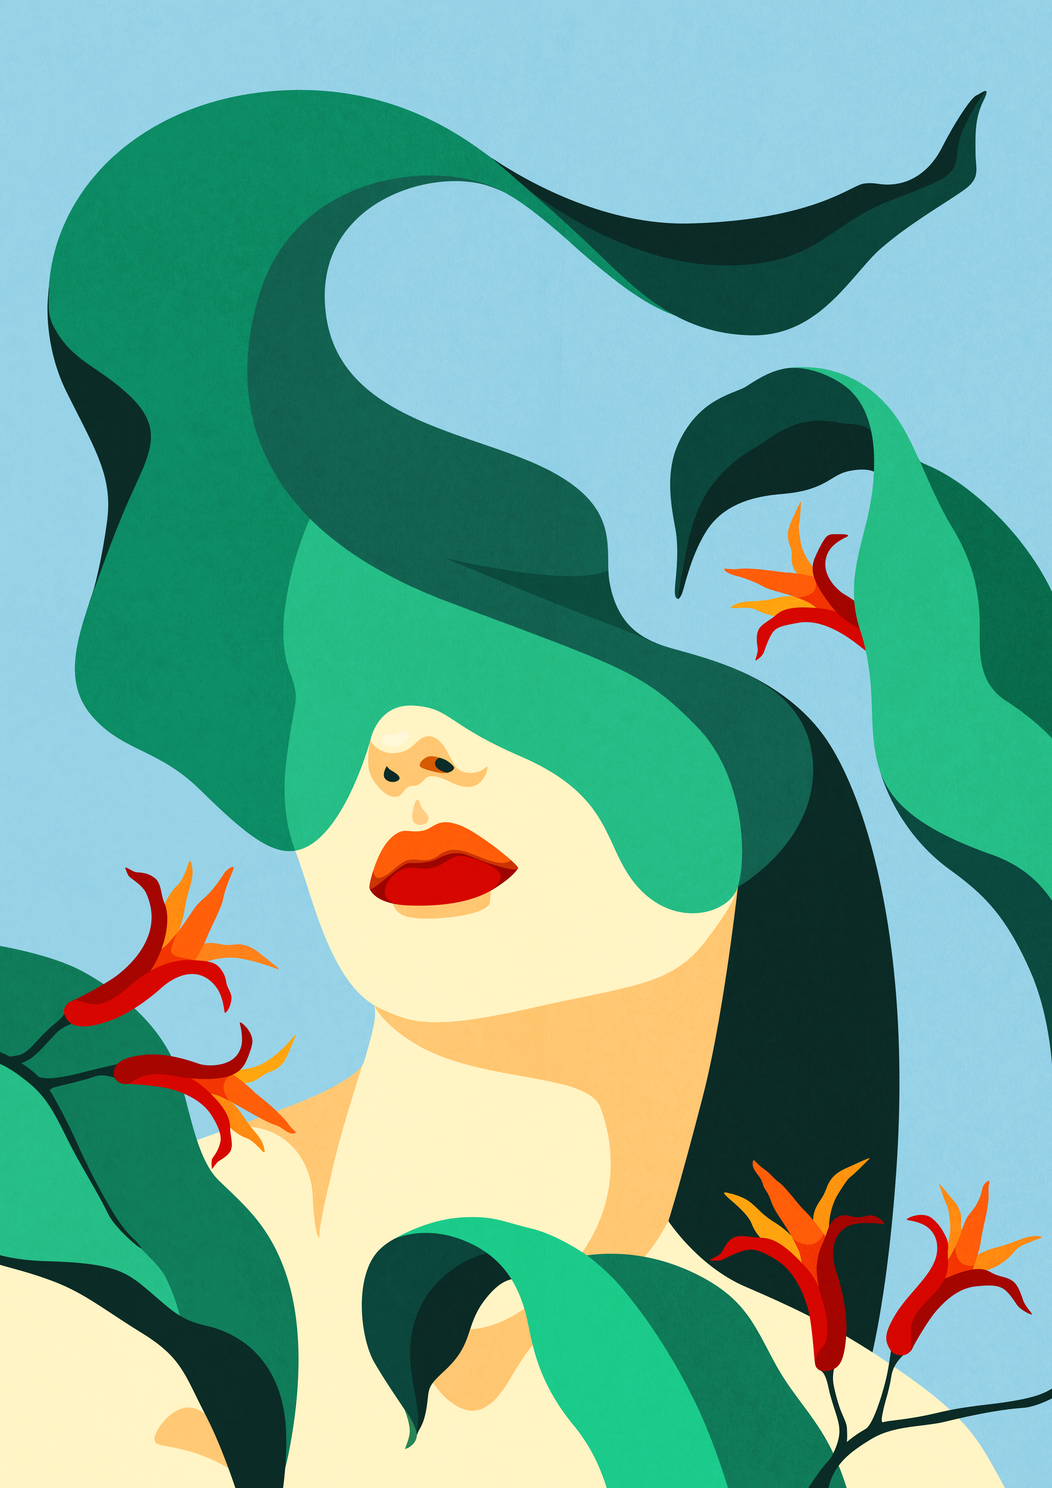 Image from the Egle Plytnikaite's Vivid Illustration Style: A Blend of Vintage and Modern article on Abduzeedo